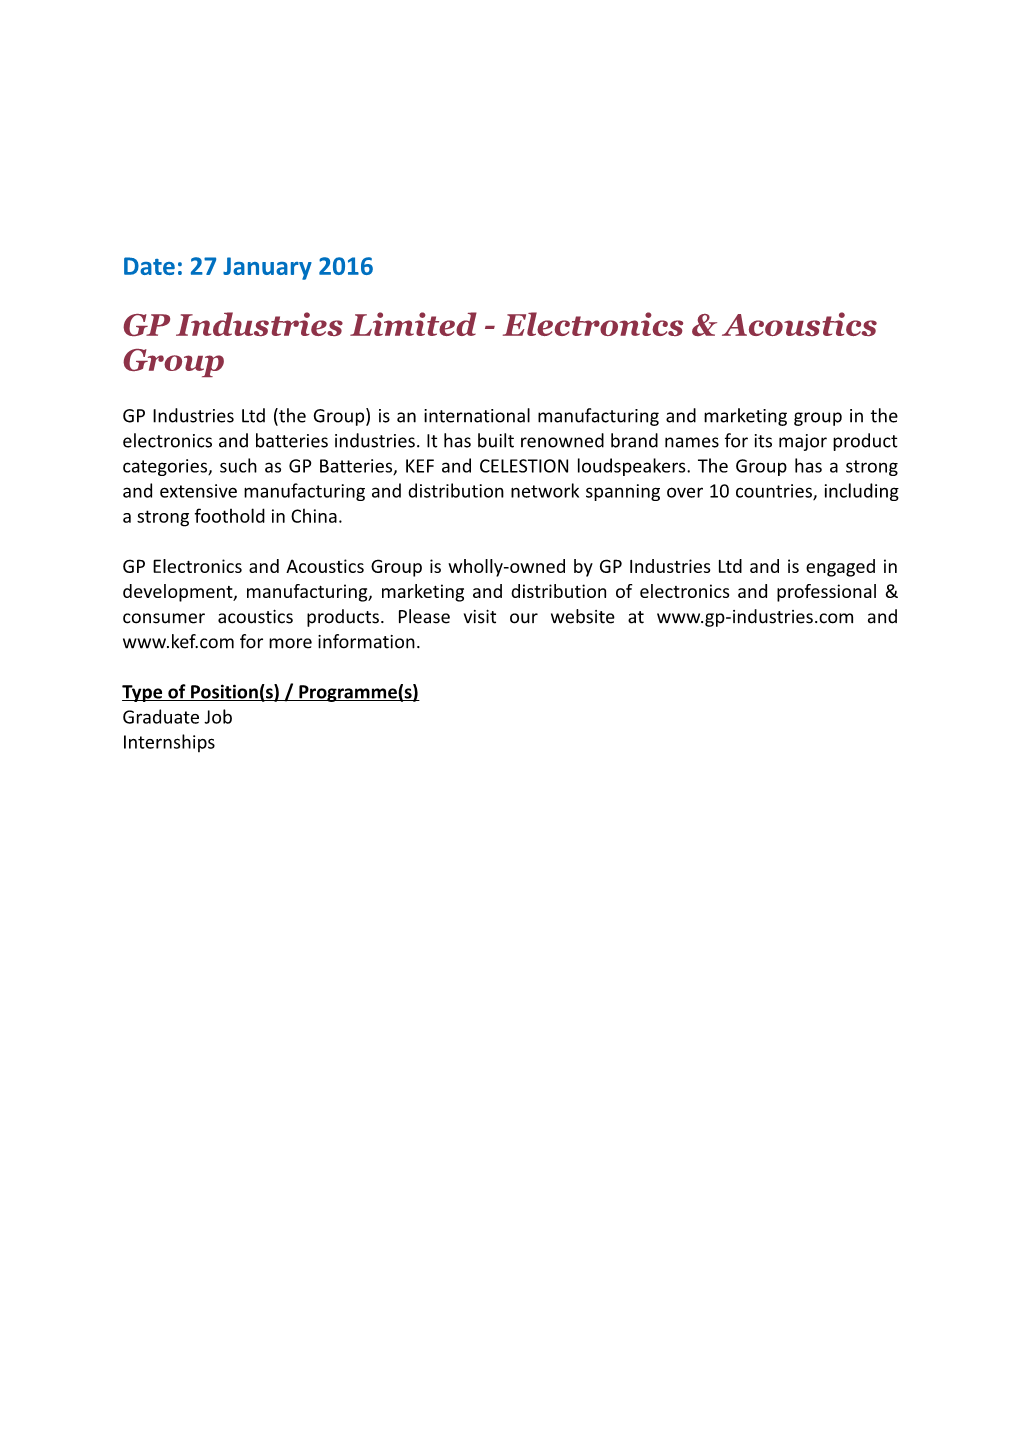 GP Industries Limited - Electronics & Acoustics Group